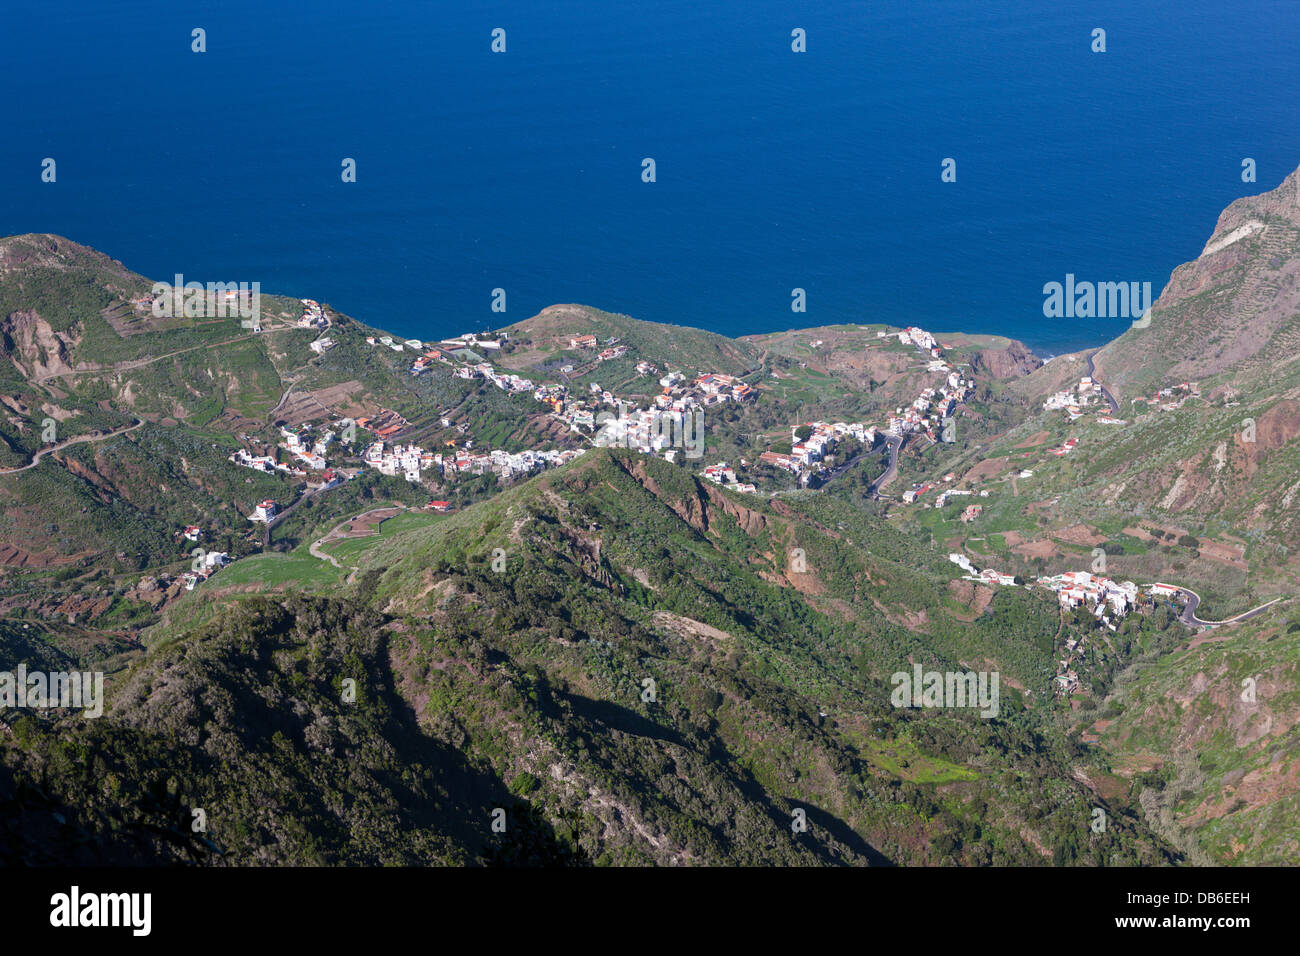 Taganana Village in the Anaga Mountains, Tenerife, Canary Islands, Spain Stock Photo